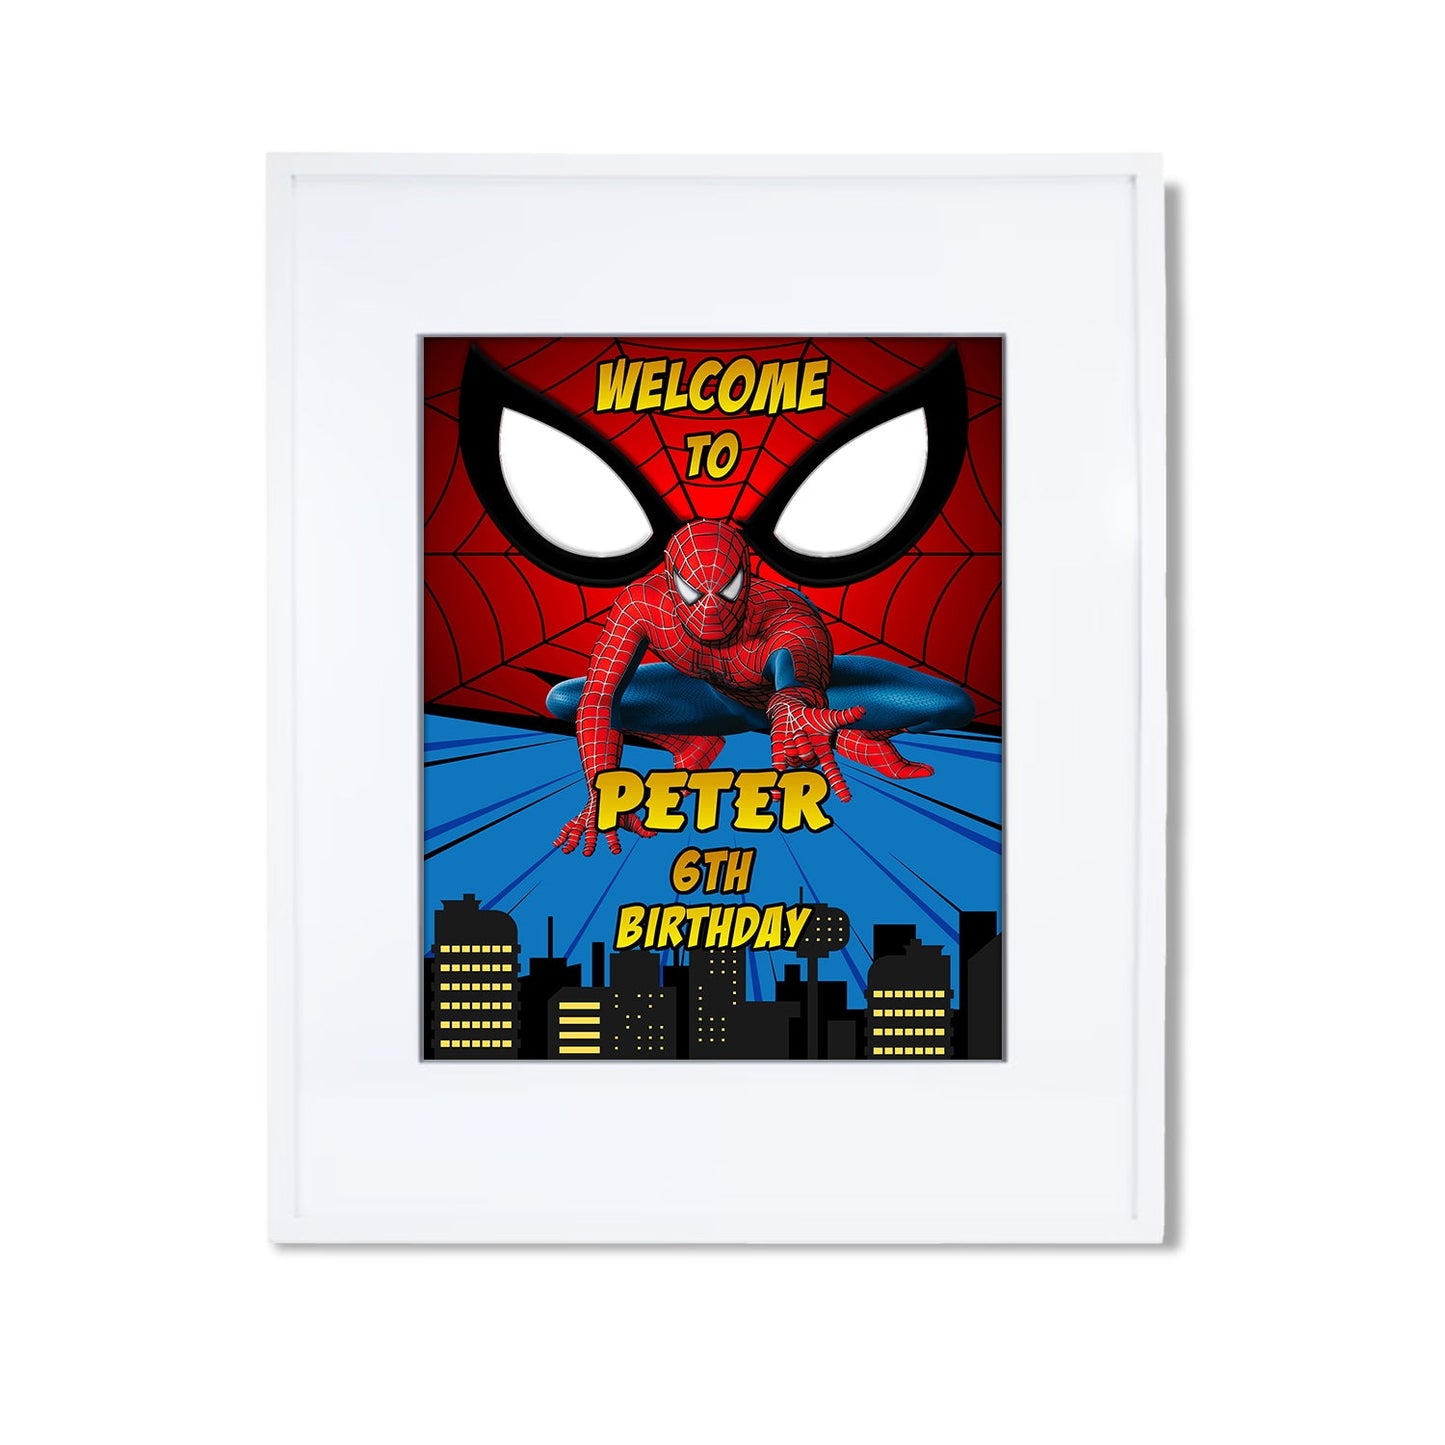 Custom sign with Spiderman theme